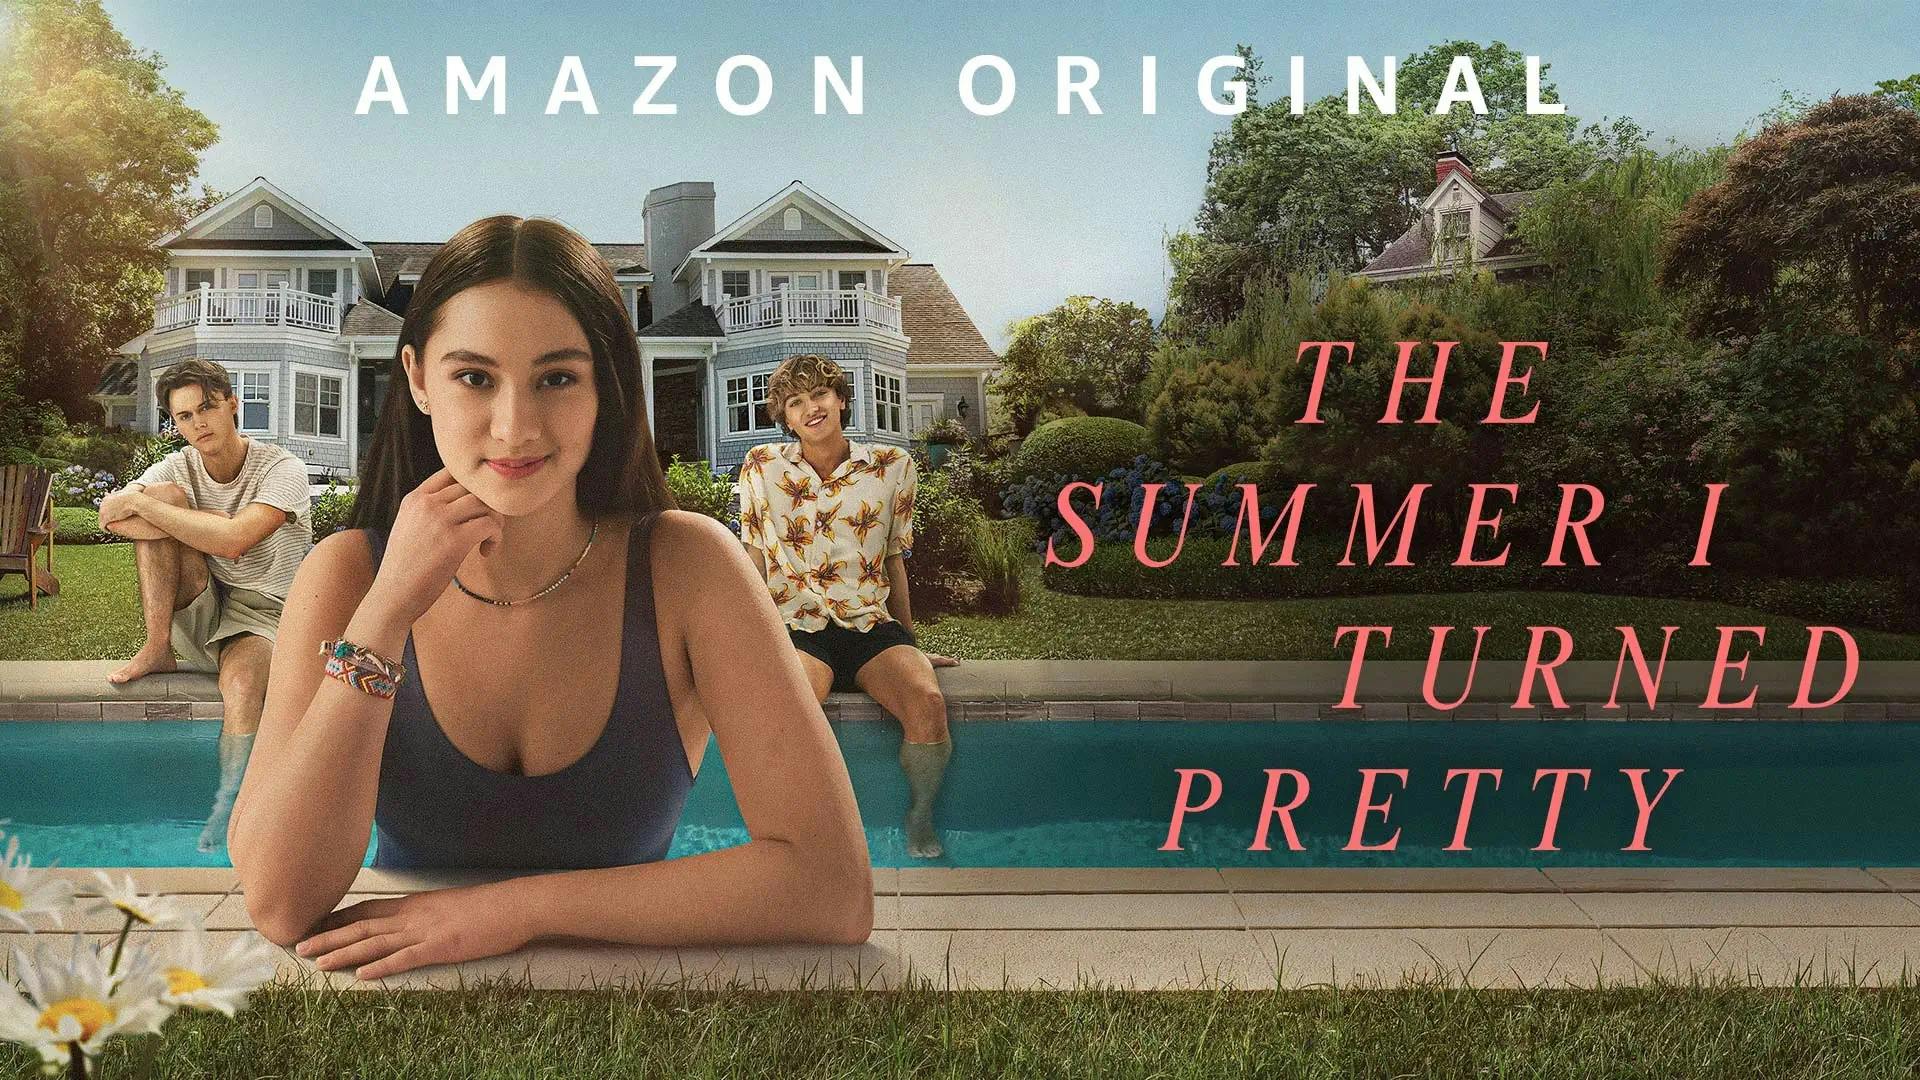 The thumbnail cover for the tv show The Summer I Turned Pretty